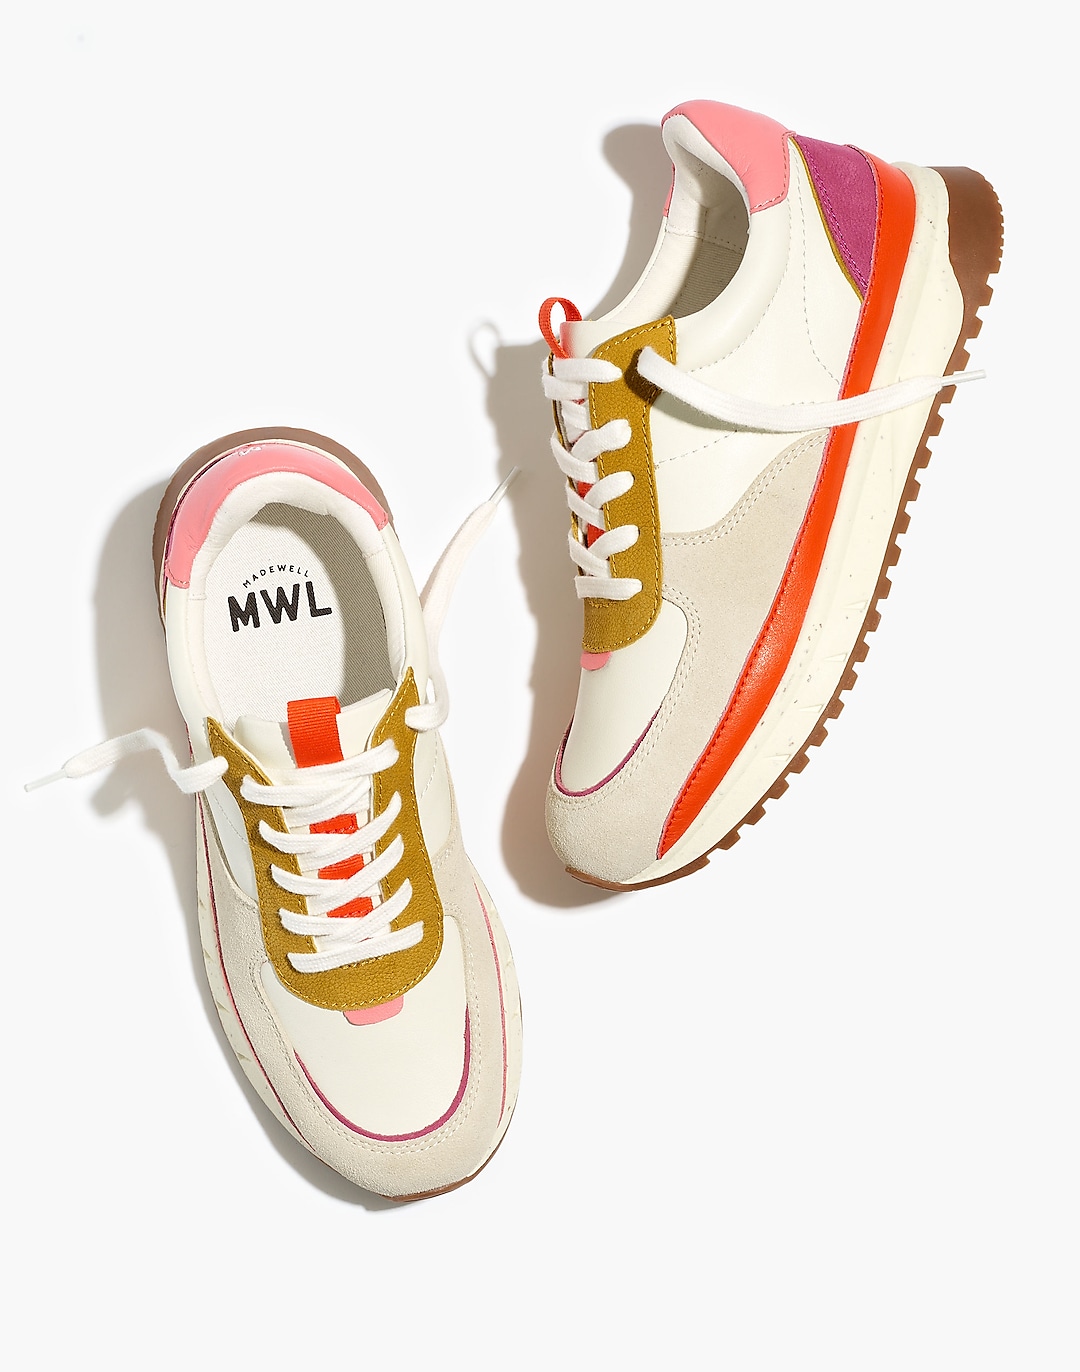 Madewell Kickoff Trainer Sneakers in Recycled Nylon and Pink Nubuck